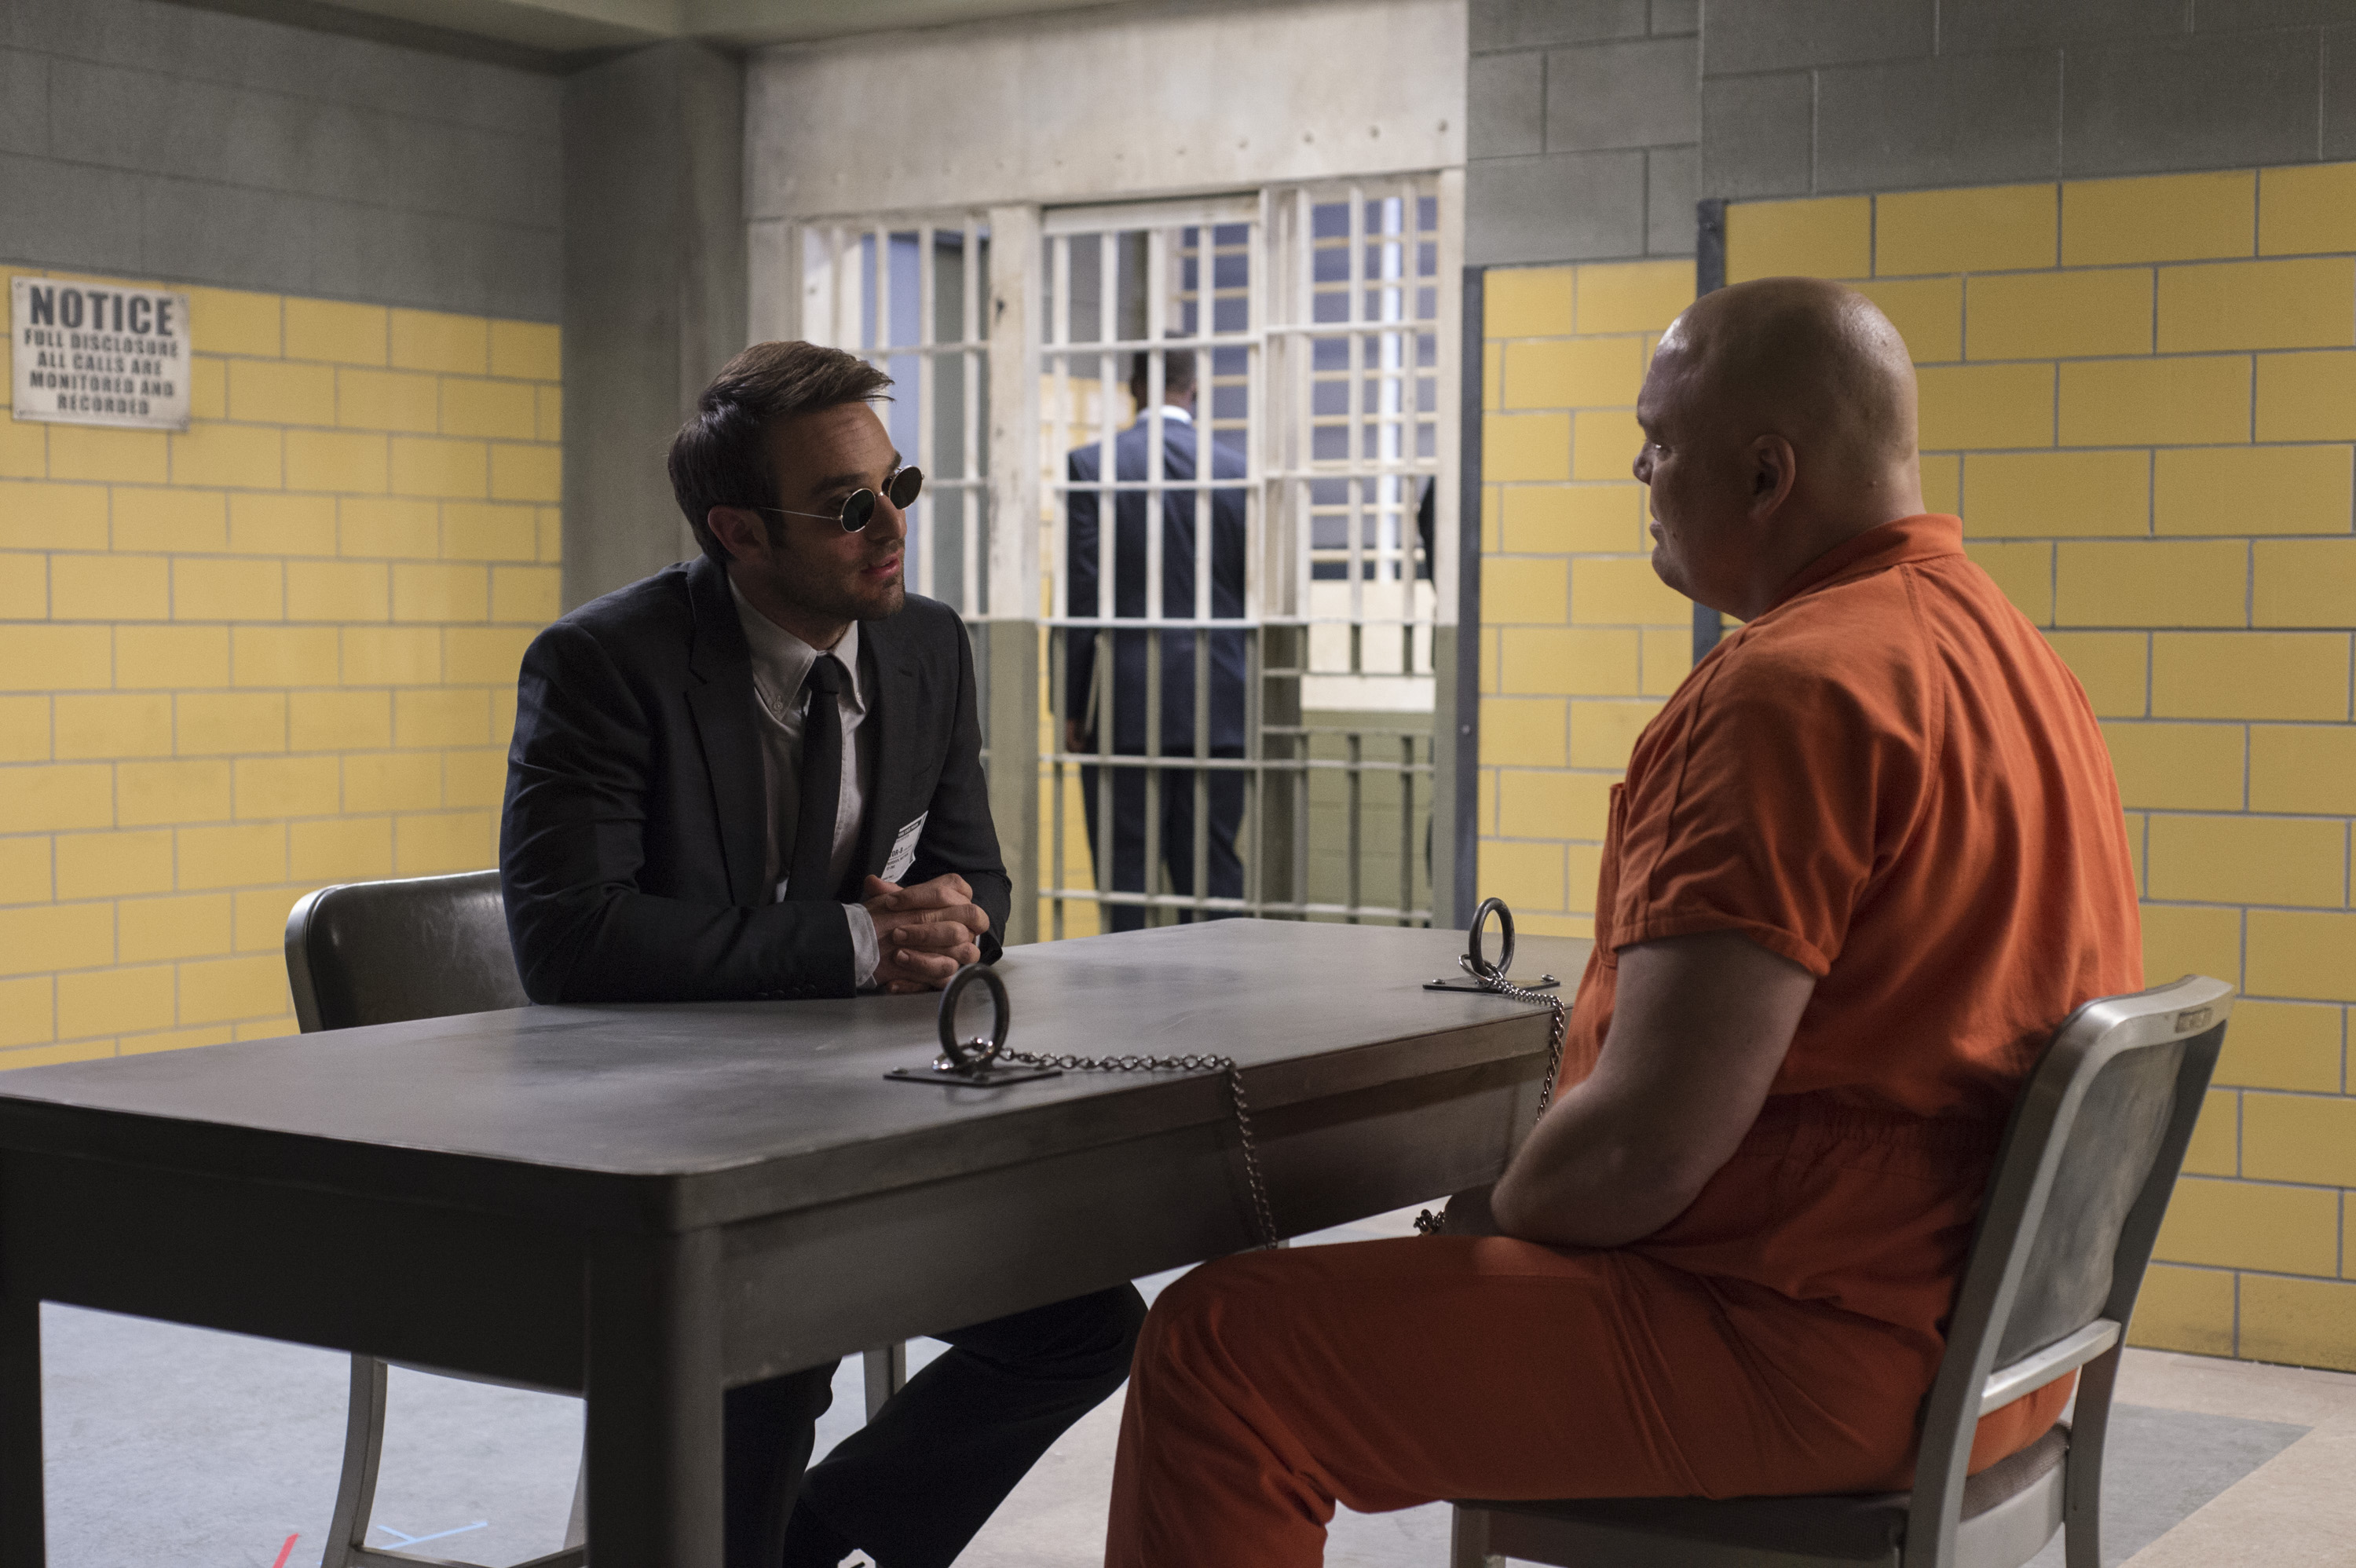 Murdock and King Ben died at the table in their prison cell